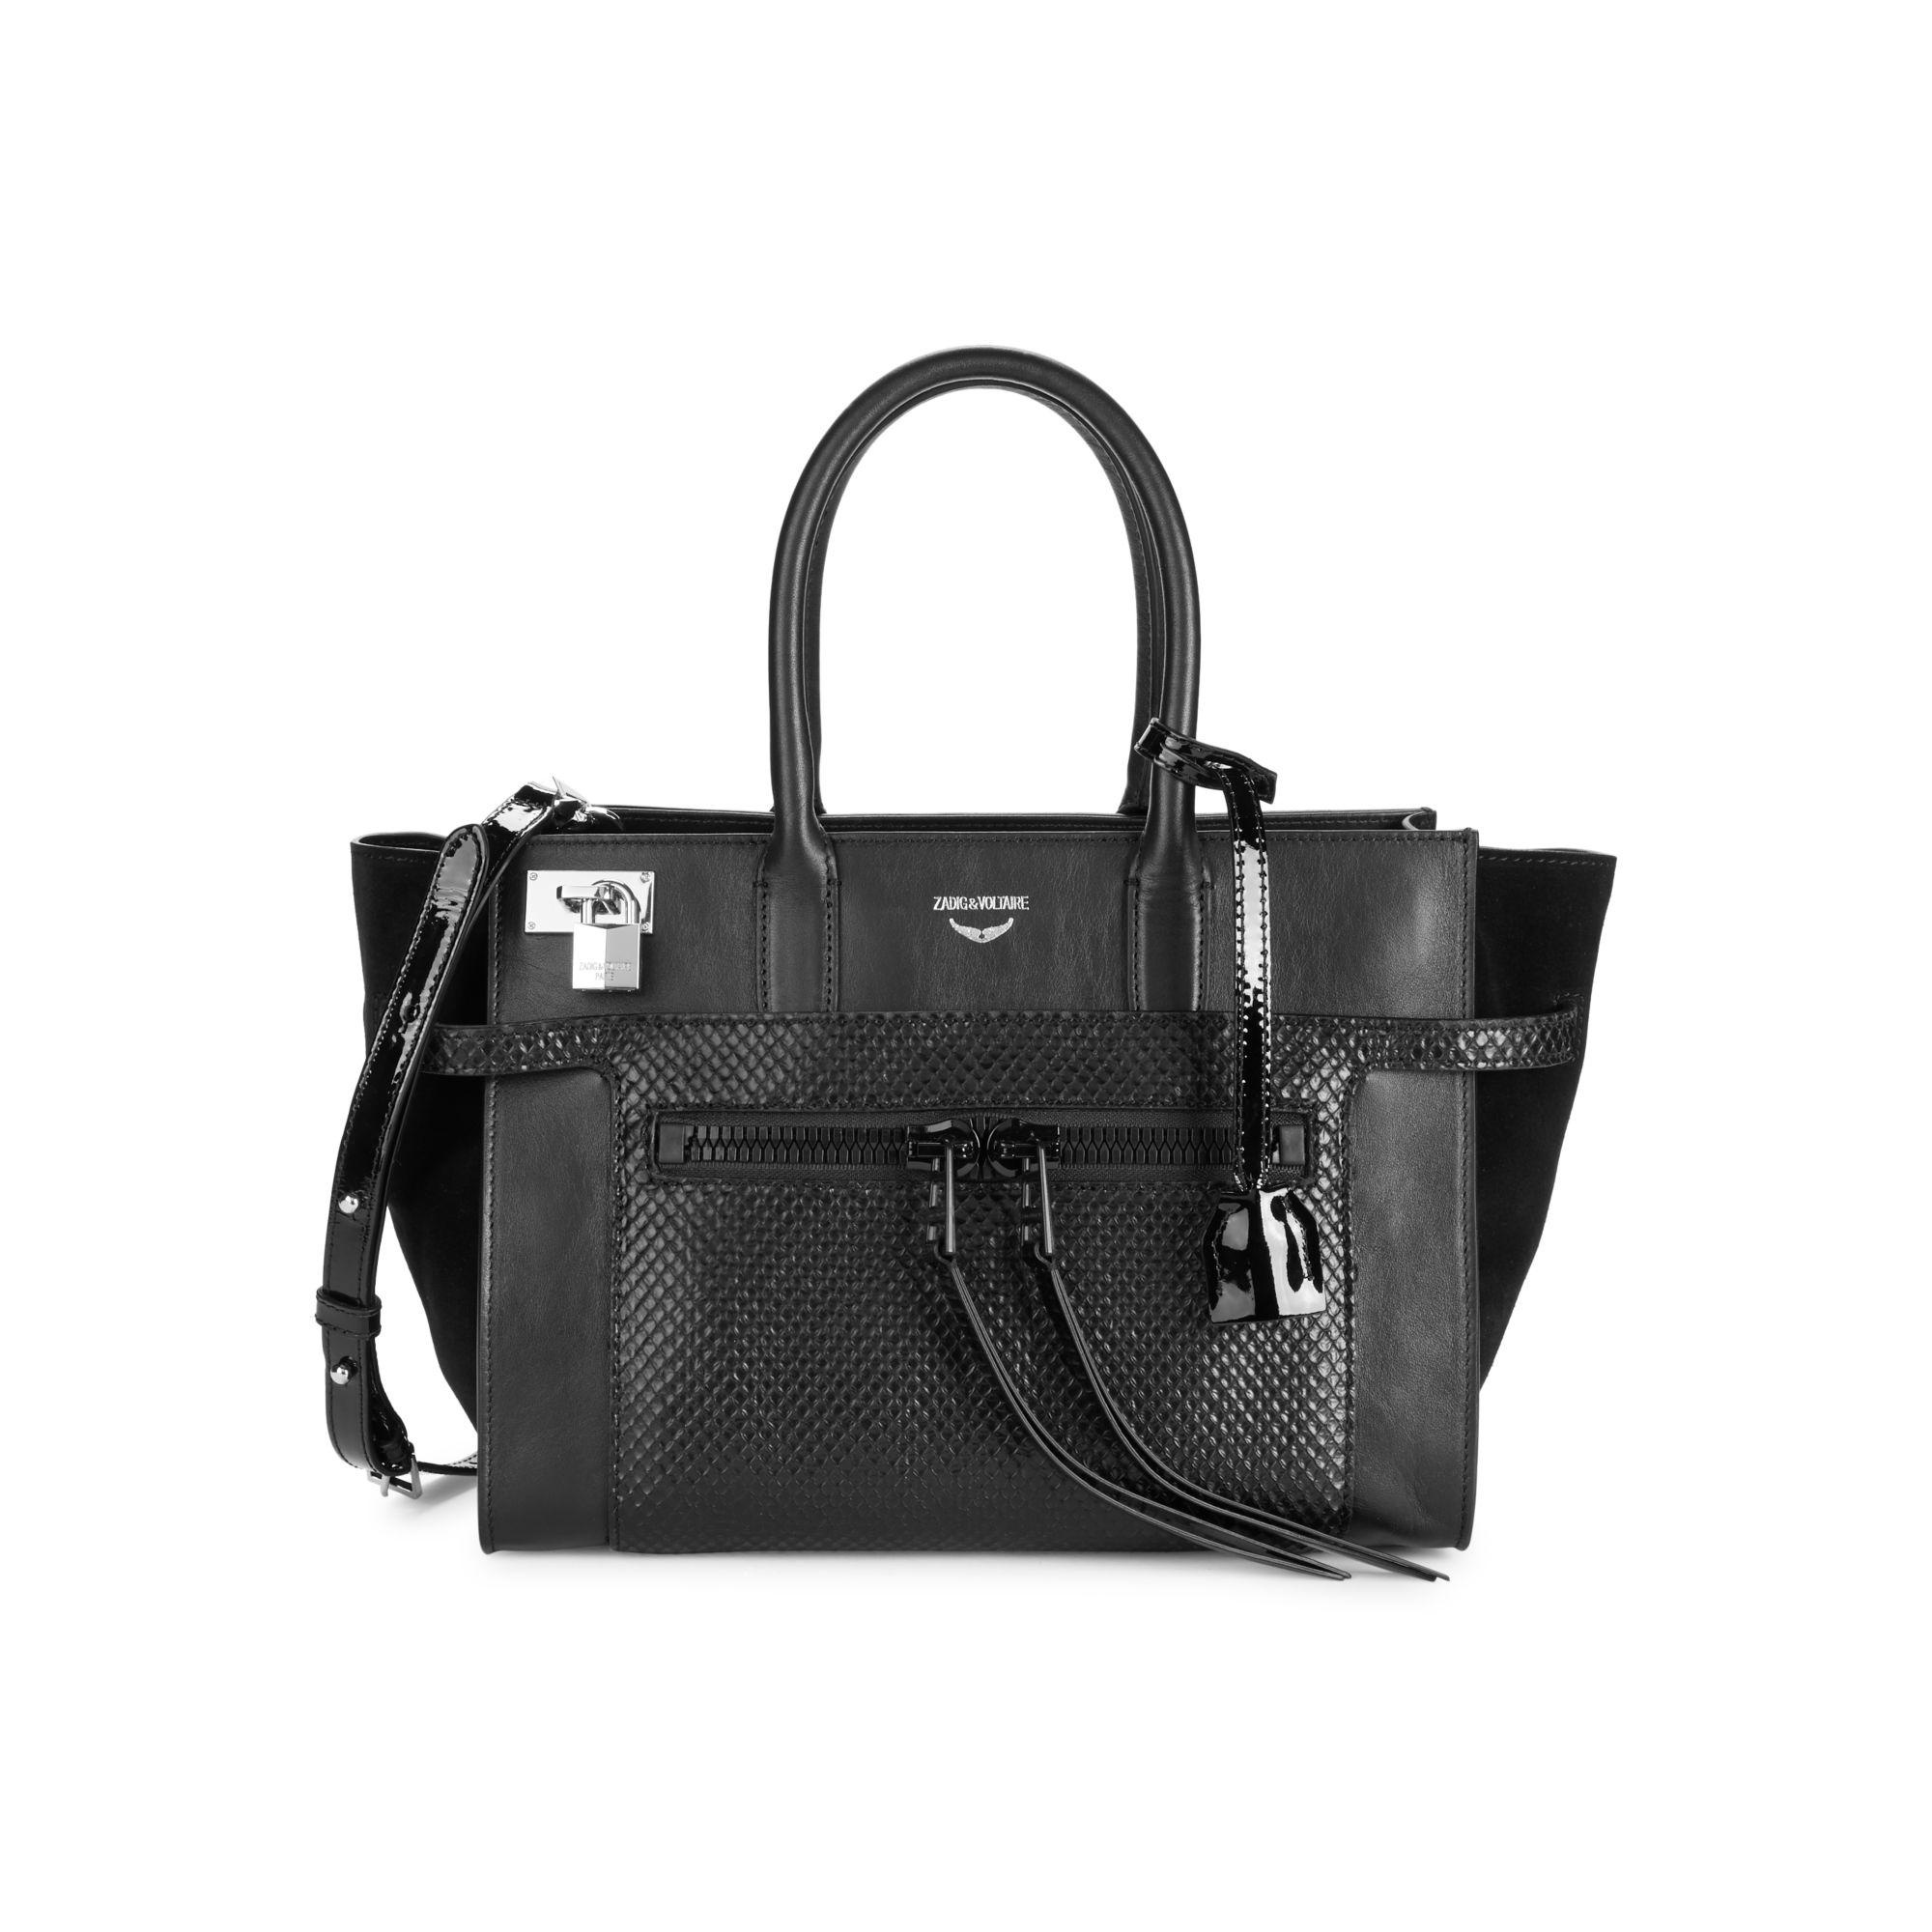 Zadig & Voltaire Candide Leather Top Handle Bag in Black | Lyst